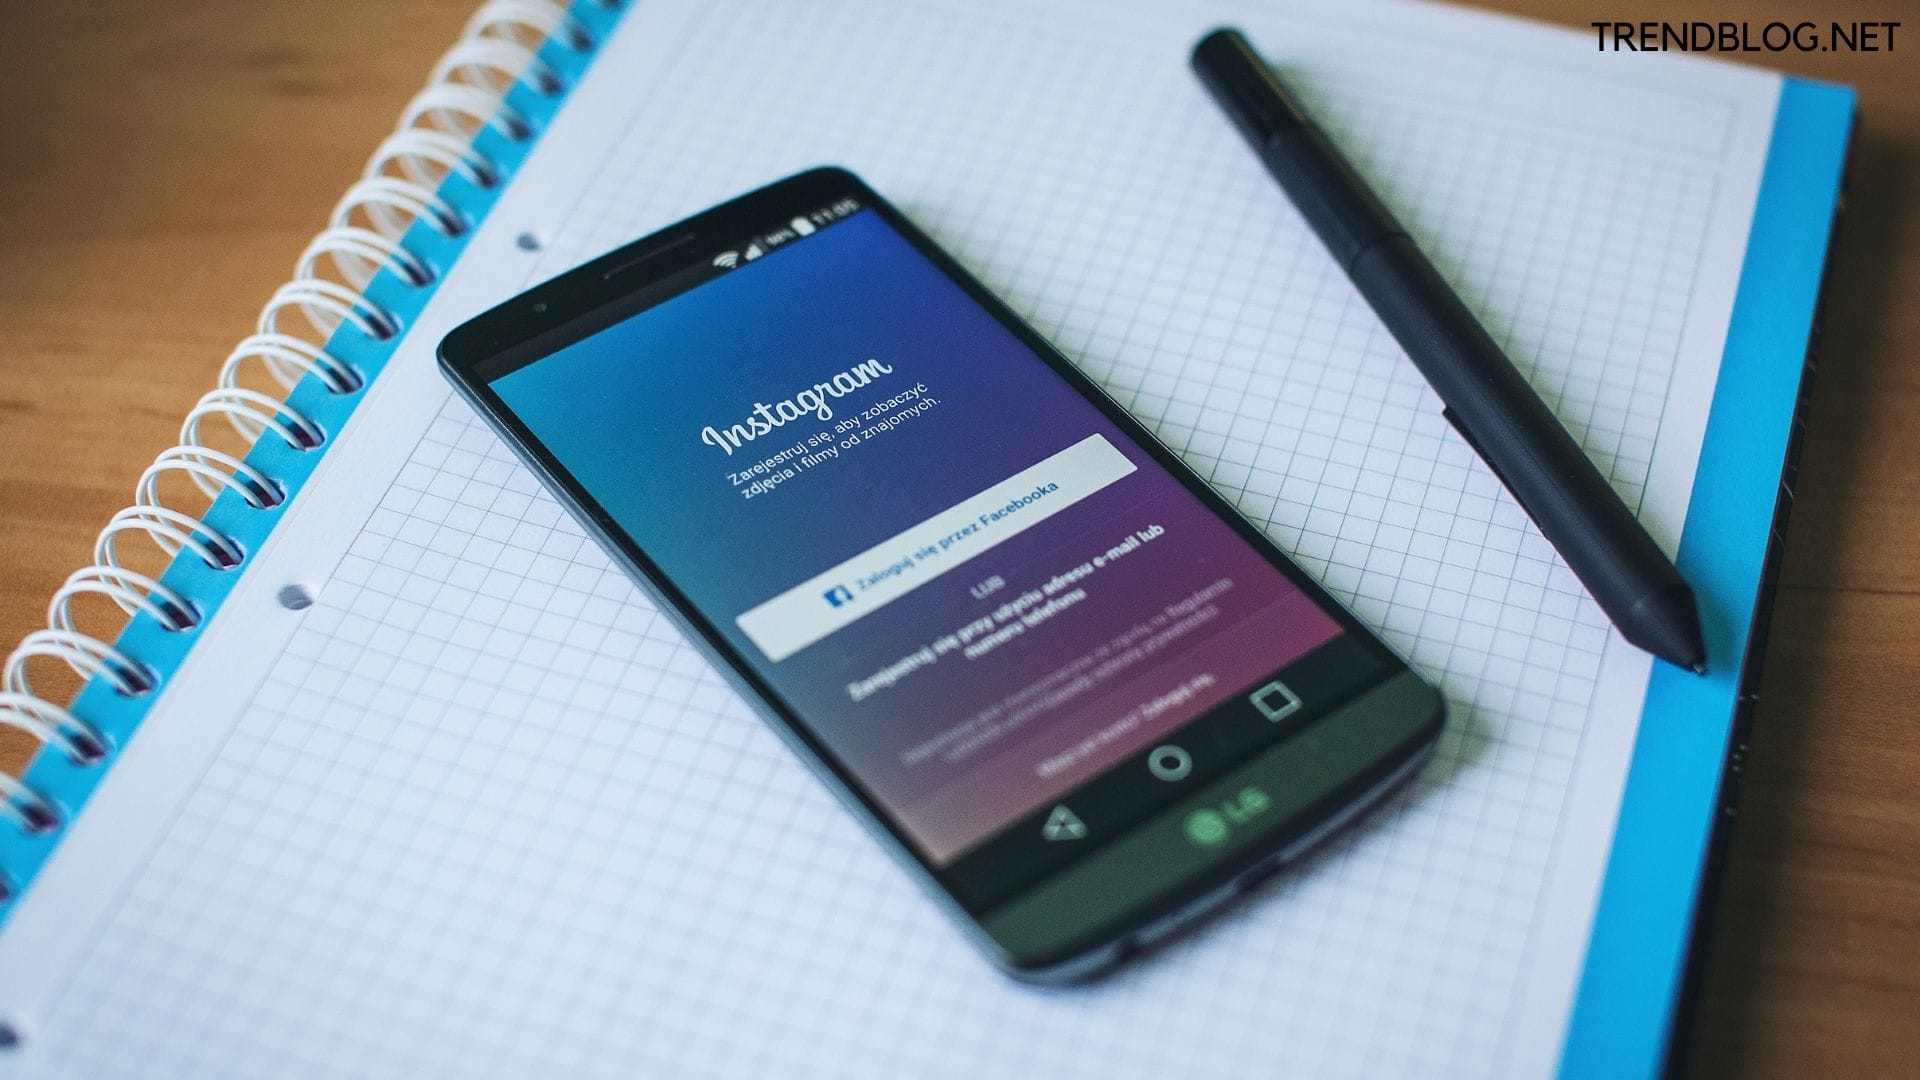  How to Unblock Someone on Instagram Using Effective Ways